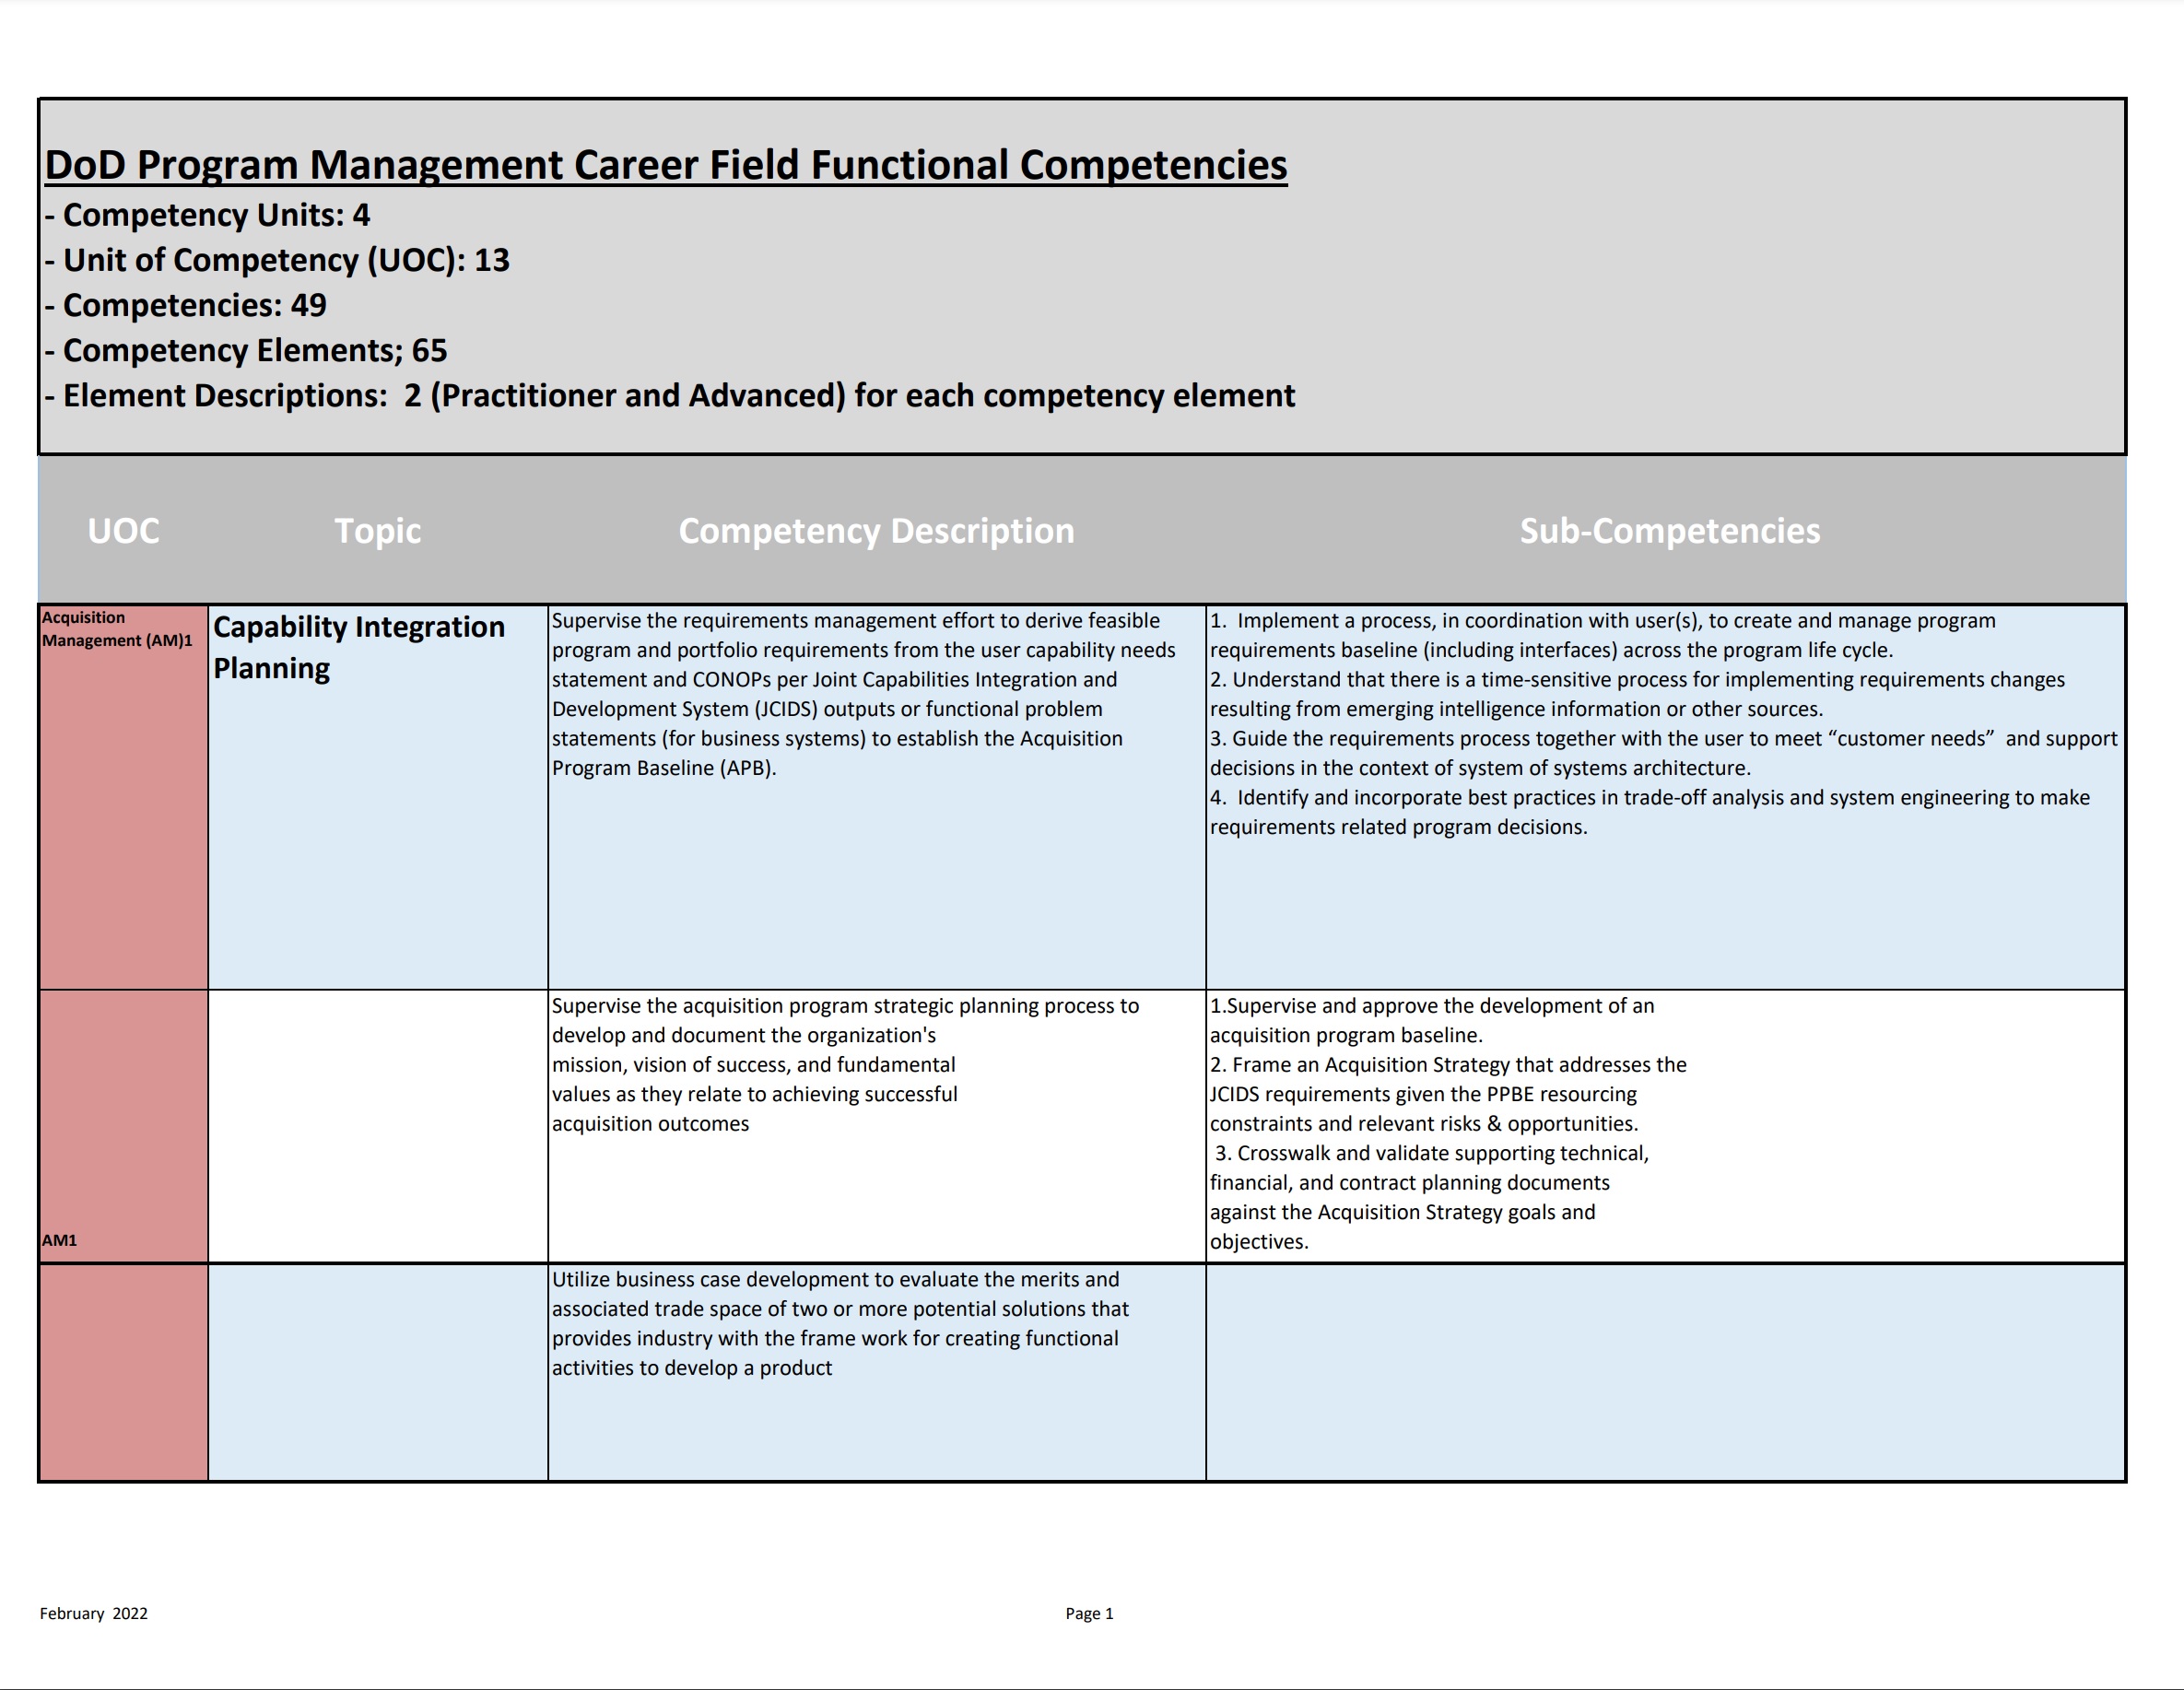 Link to PM Functional Competencies Chart